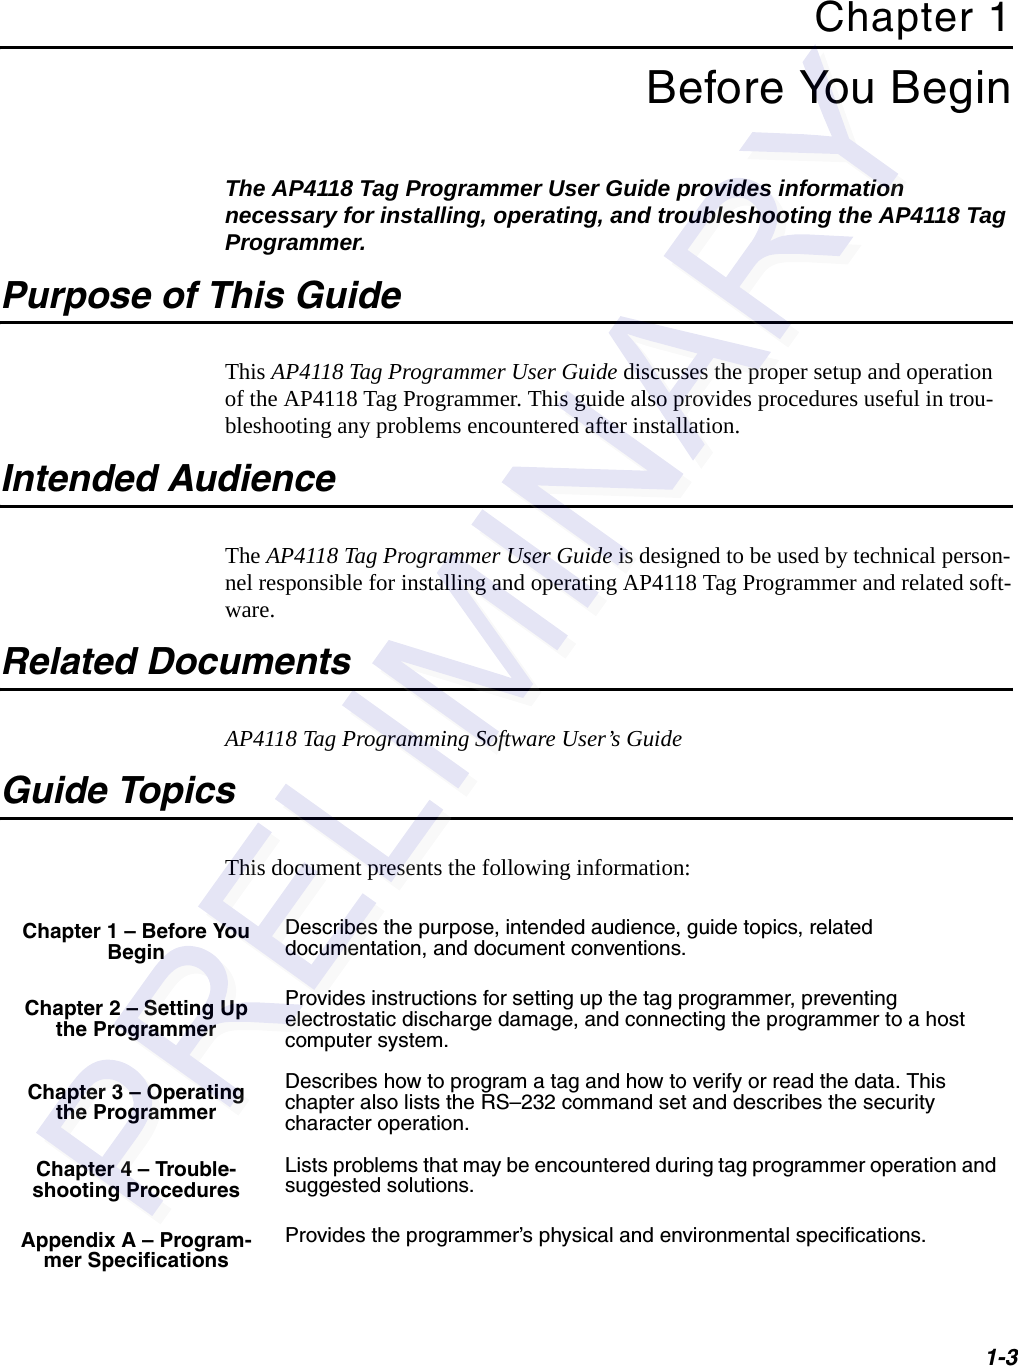 1-3Chapter 1 Before You BeginThe AP4118 Tag Programmer User Guide provides information necessary for installing, operating, and troubleshooting the AP4118 Tag Programmer.Purpose of This GuideThis AP4118 Tag Programmer User Guide discusses the proper setup and operation of the AP4118 Tag Programmer. This guide also provides procedures useful in trou-bleshooting any problems encountered after installation.Intended AudienceThe AP4118 Tag Programmer User Guide is designed to be used by technical person-nel responsible for installing and operating AP4118 Tag Programmer and related soft-ware.Related DocumentsAP4118 Tag Programming Software User’s GuideGuide TopicsThis document presents the following information:Chapter 1 – Before You BeginDescribes the purpose, intended audience, guide topics, related documentation, and document conventions.Chapter 2 – Setting Up the ProgrammerProvides instructions for setting up the tag programmer, preventing electrostatic discharge damage, and connecting the programmer to a host computer system.Chapter 3 – Operating the ProgrammerDescribes how to program a tag and how to verify or read the data. This chapter also lists the RS–232 command set and describes the security character operation.Chapter 4 – Trouble-shooting ProceduresLists problems that may be encountered during tag programmer operation and suggested solutions.Appendix A – Program-mer SpecificationsProvides the programmer’s physical and environmental specifications.